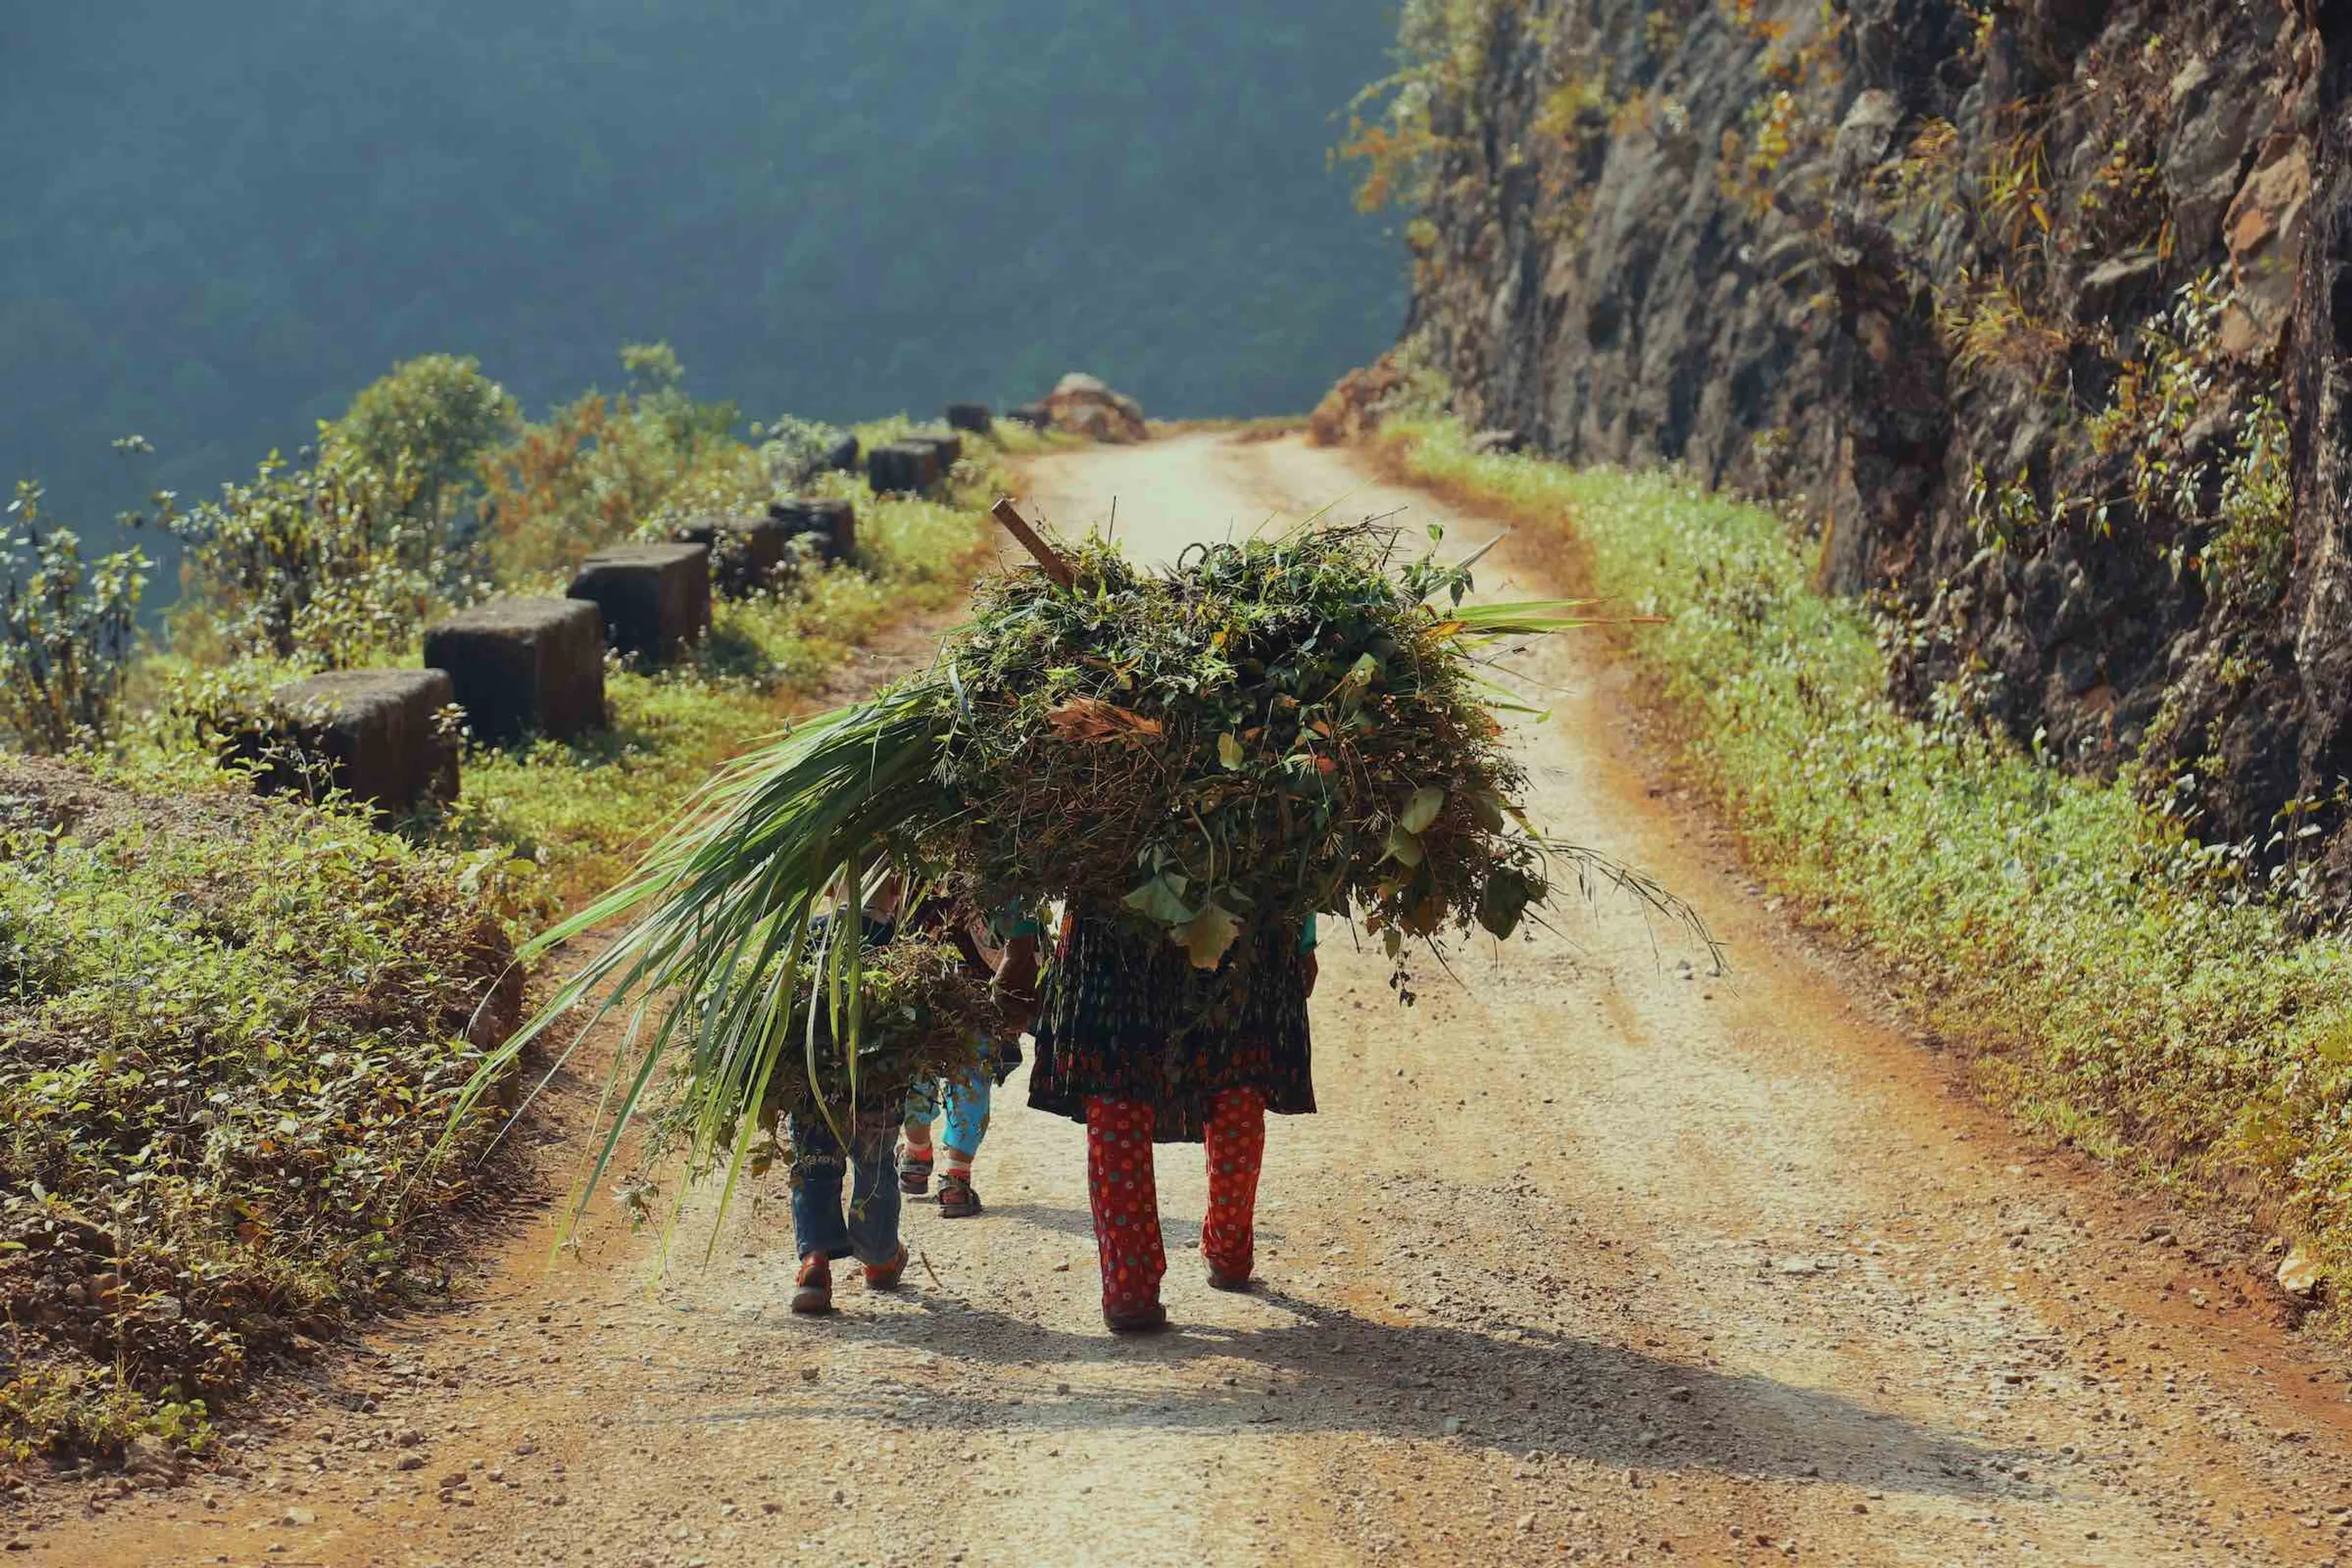 A family carrying vegetables home - taken by Minh Triet